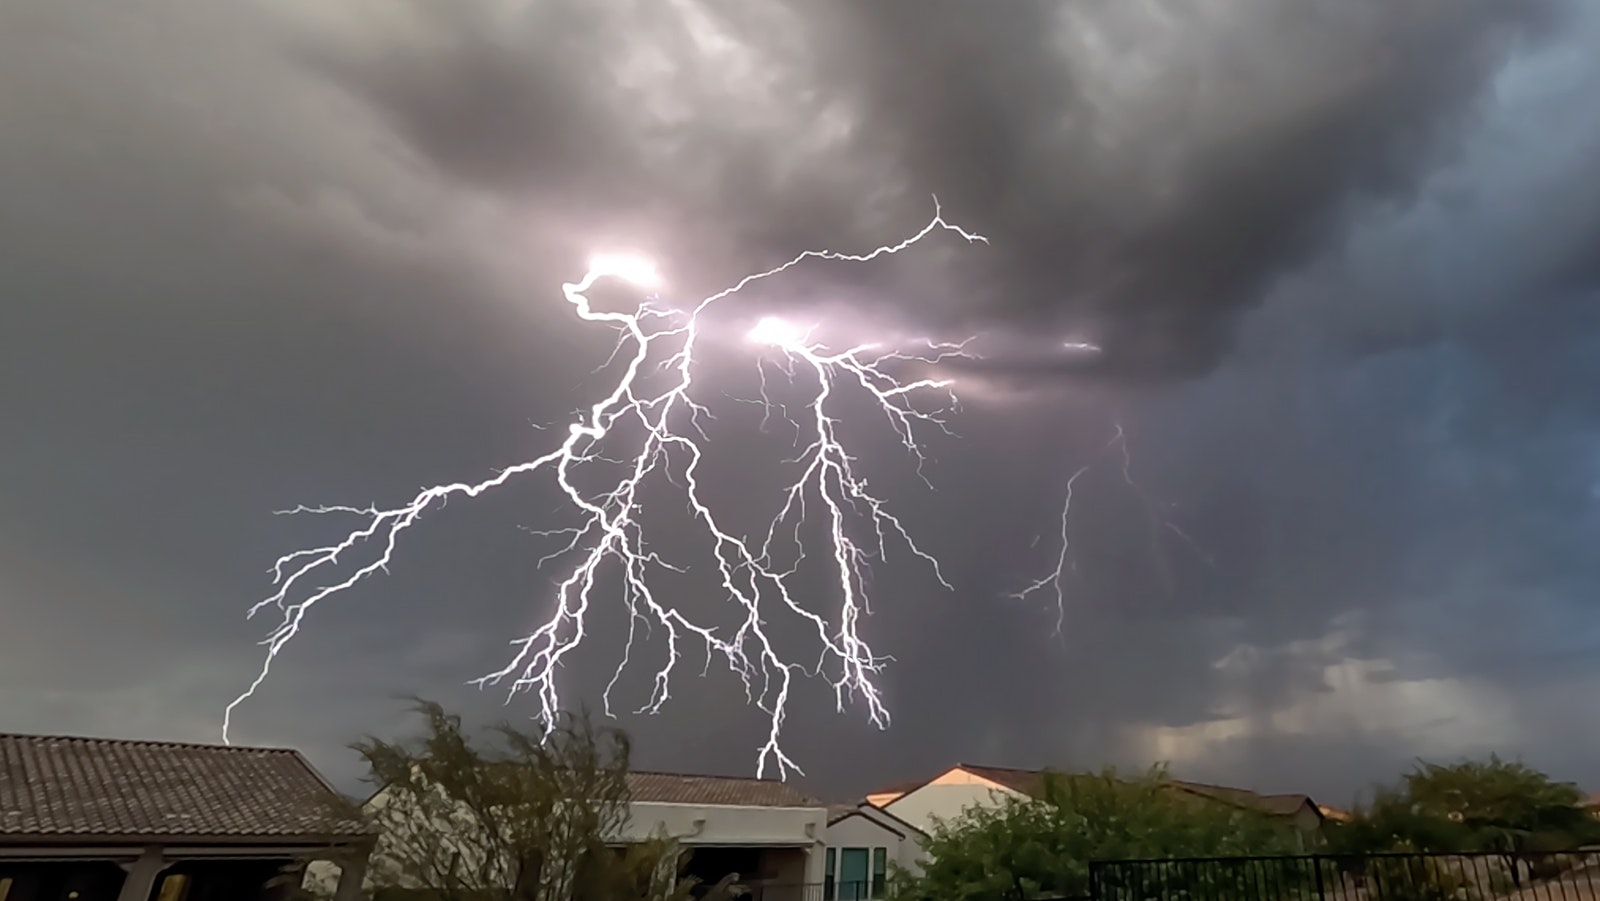 A quarter-second exposure captured these lightning strikes in stunning detail.